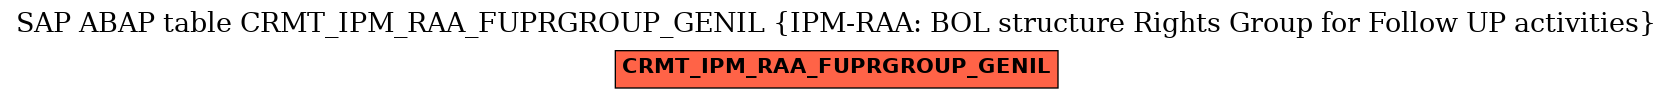 E-R Diagram for table CRMT_IPM_RAA_FUPRGROUP_GENIL (IPM-RAA: BOL structure Rights Group for Follow UP activities)